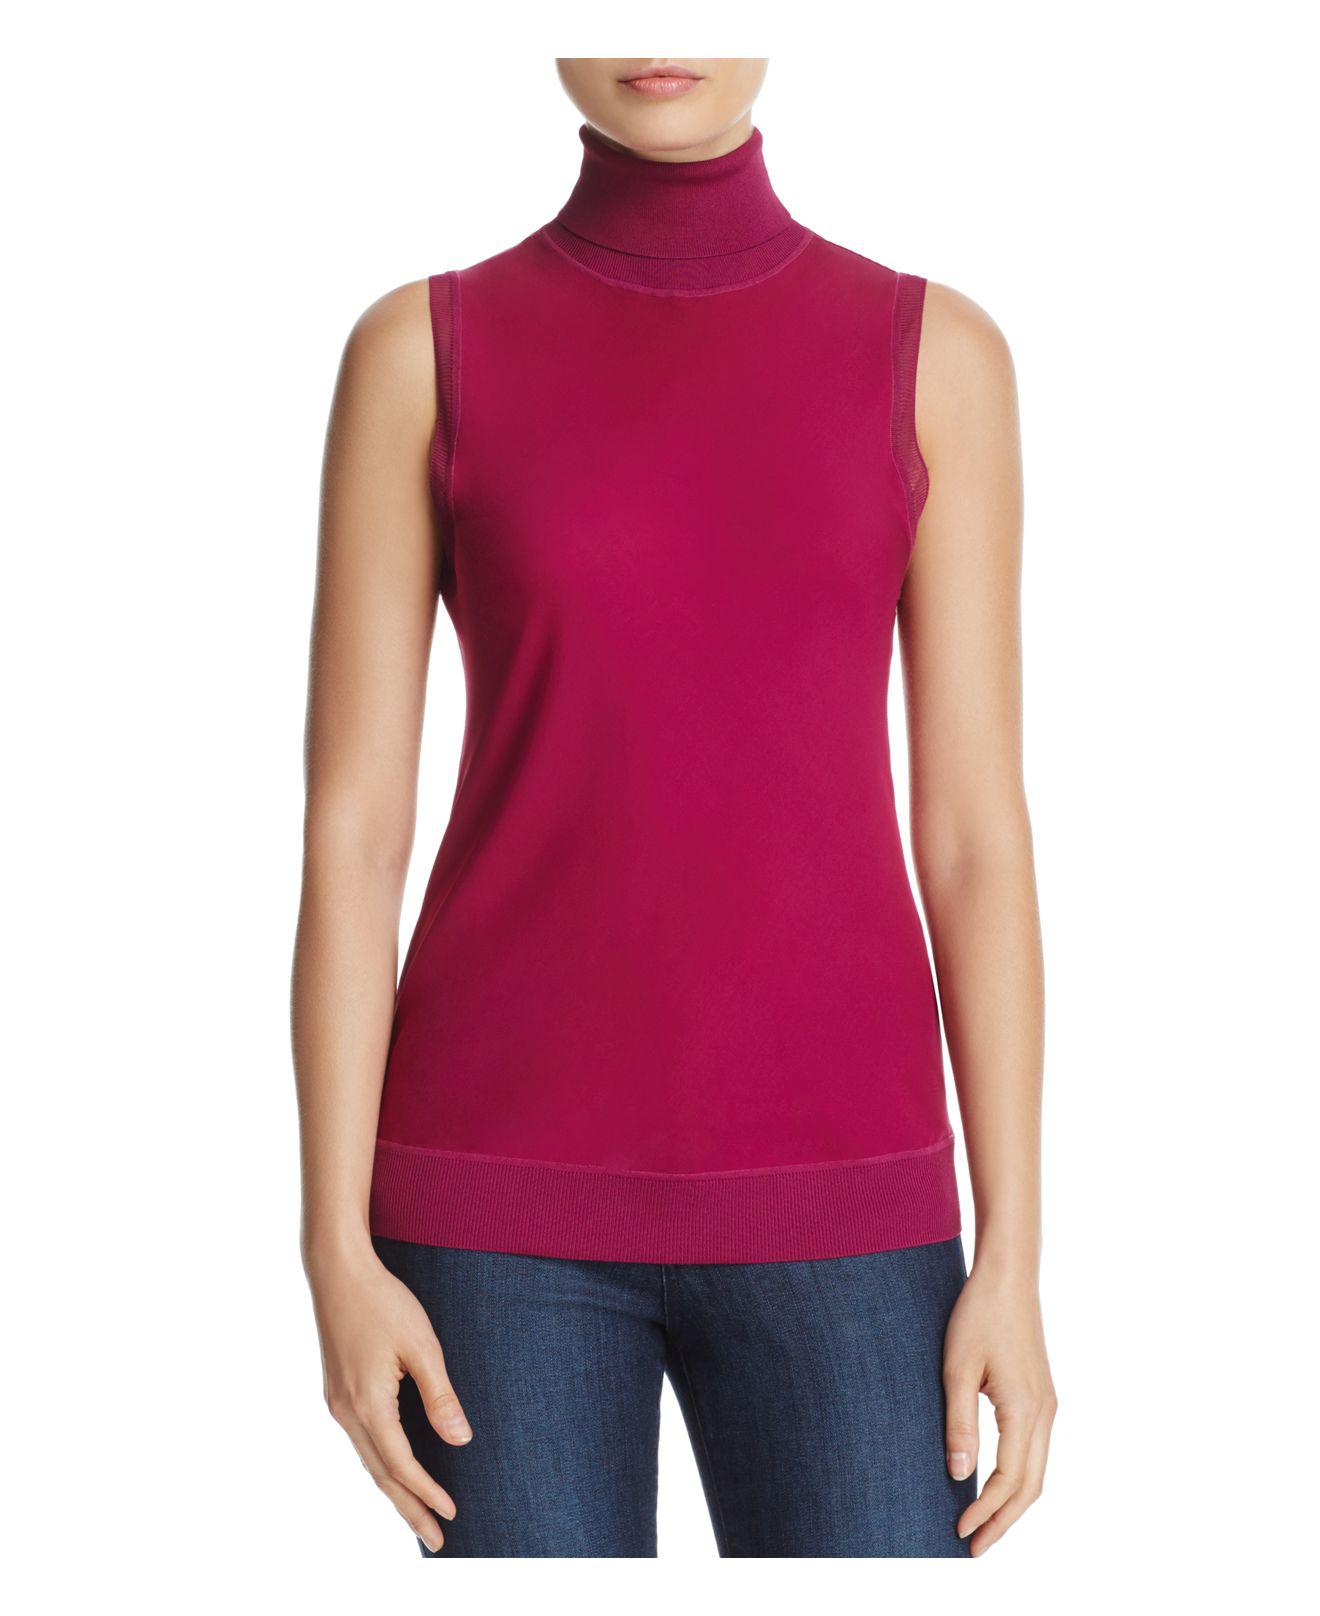 Lyst - Theory Turtleneck Silk Top in Pink